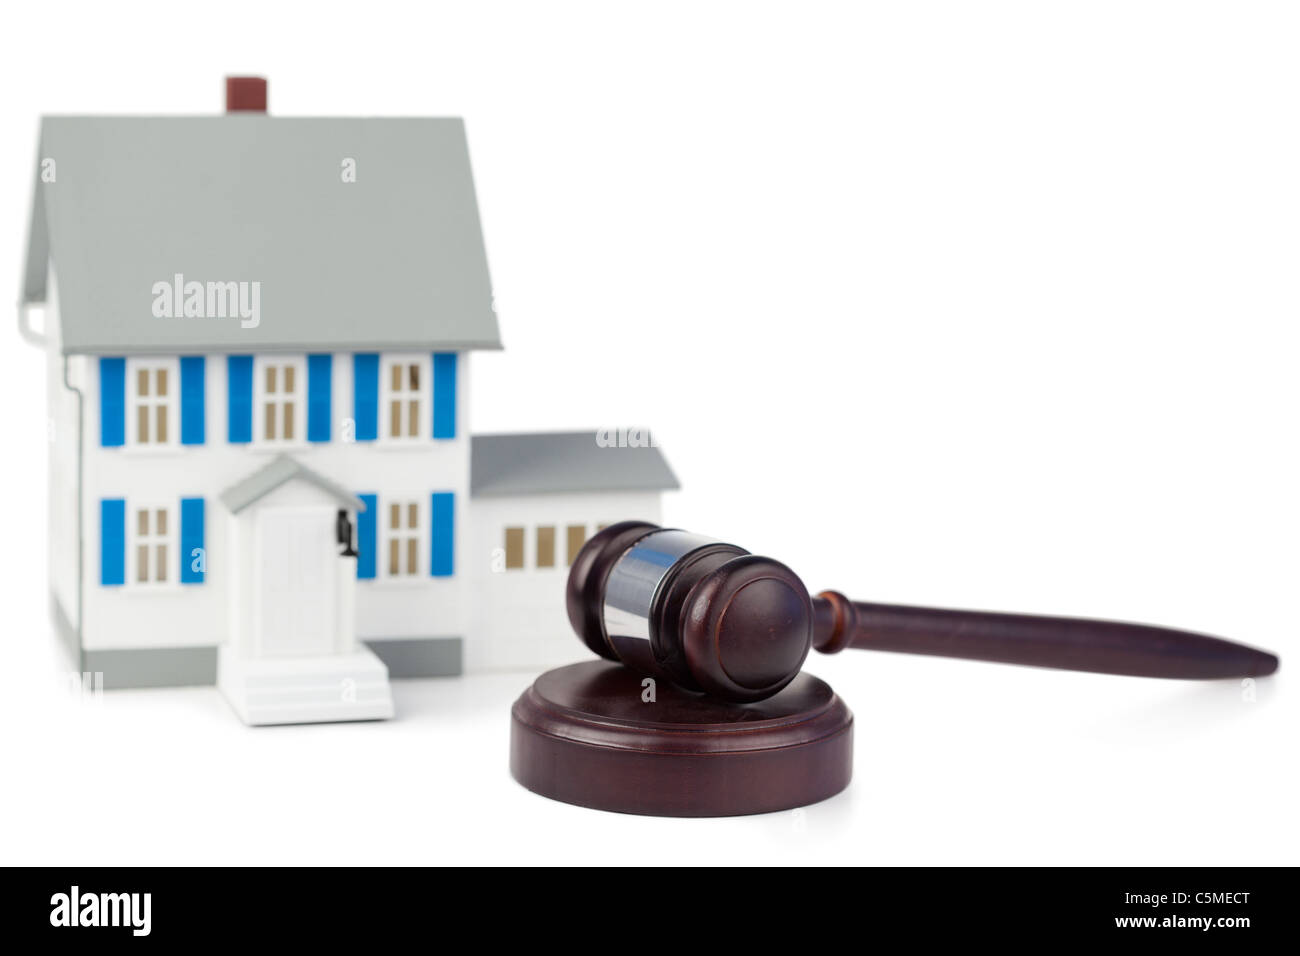 Gray toy house model and brown gavel Banque D'Images